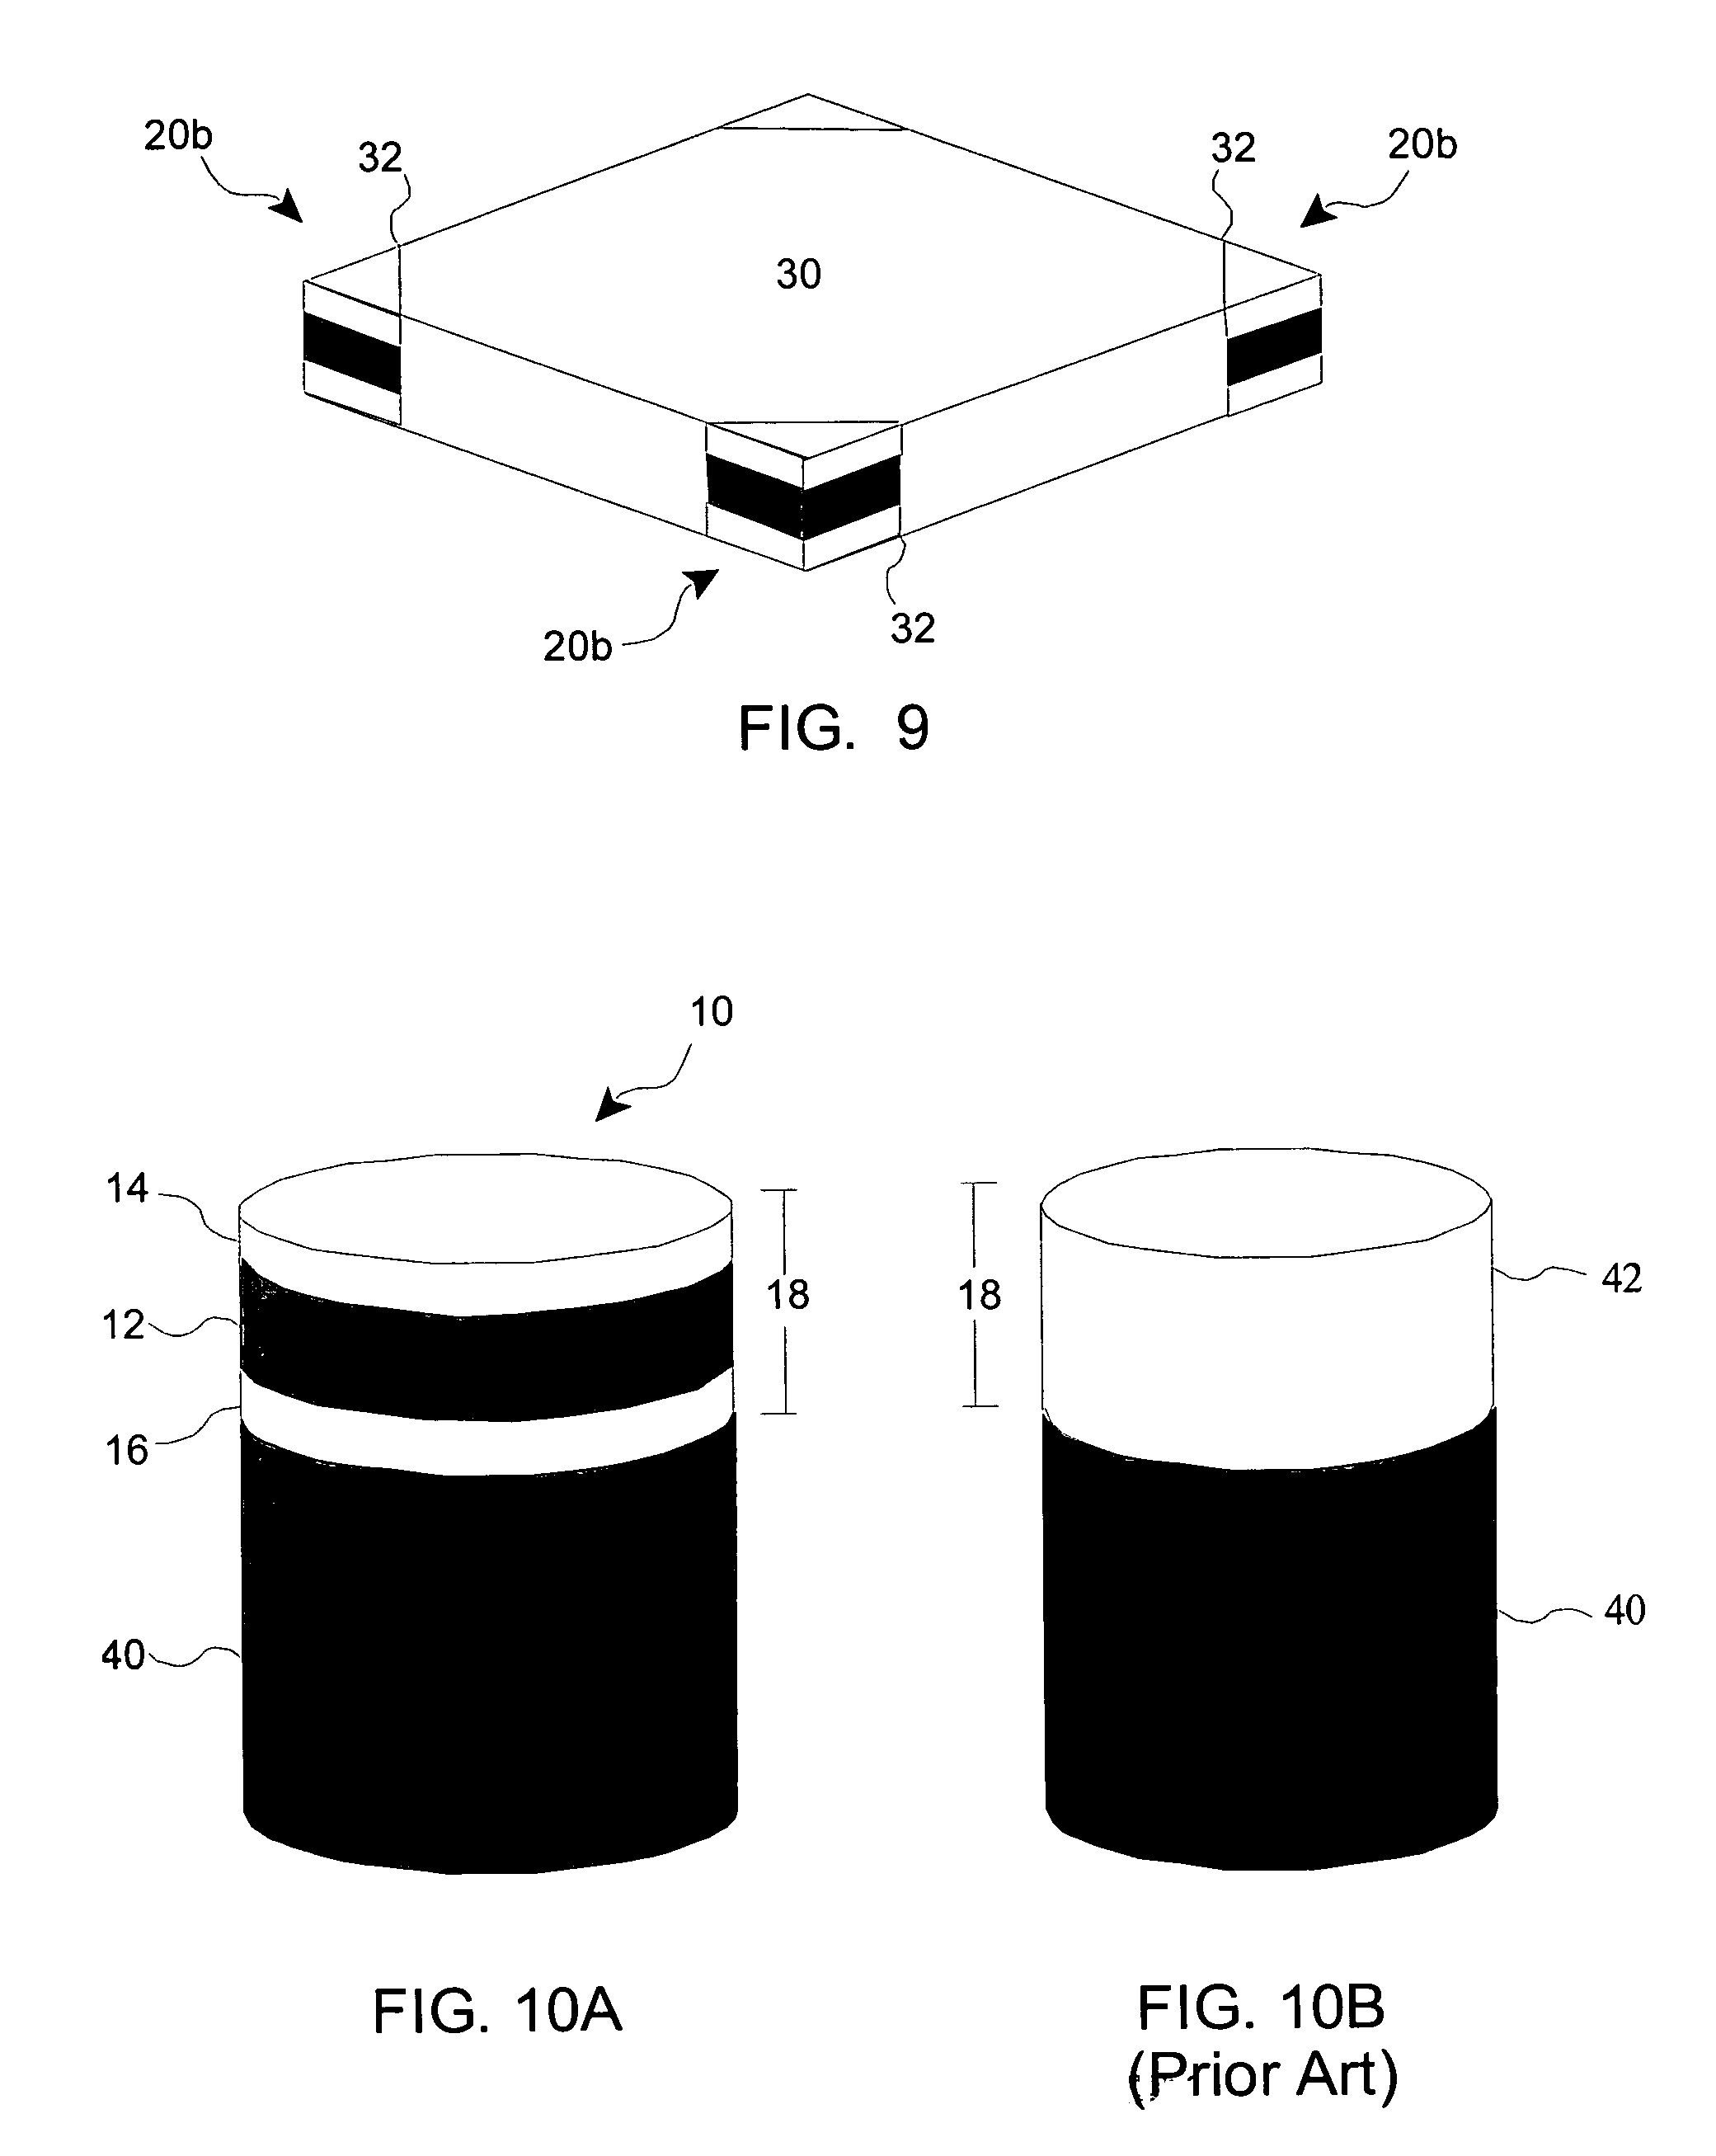 Doubled-sided and multi-layered PCBN and PCD abrasive articles